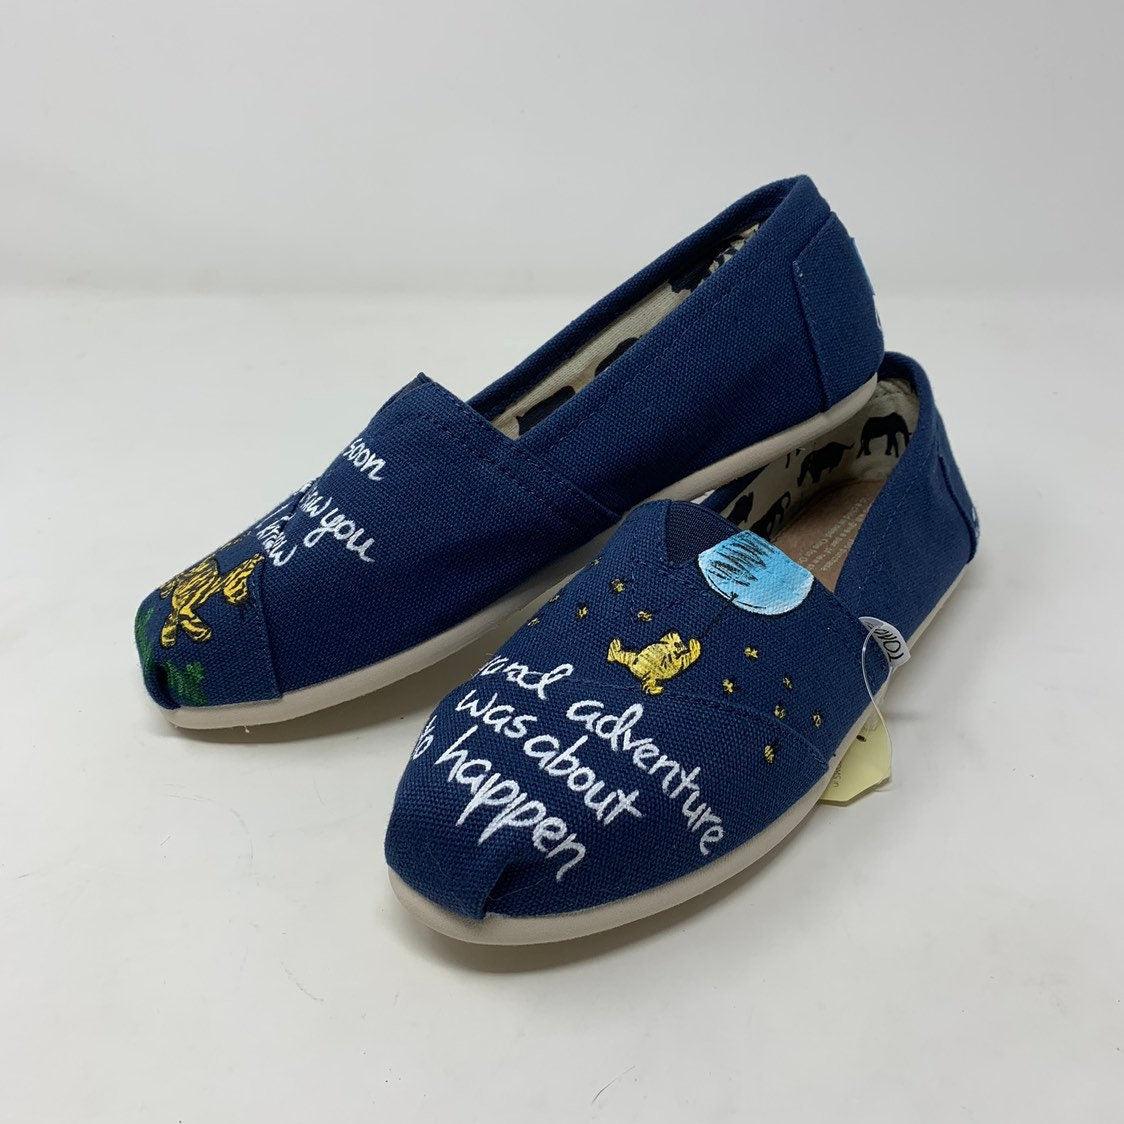 Winnie-the-Pooh Shoes